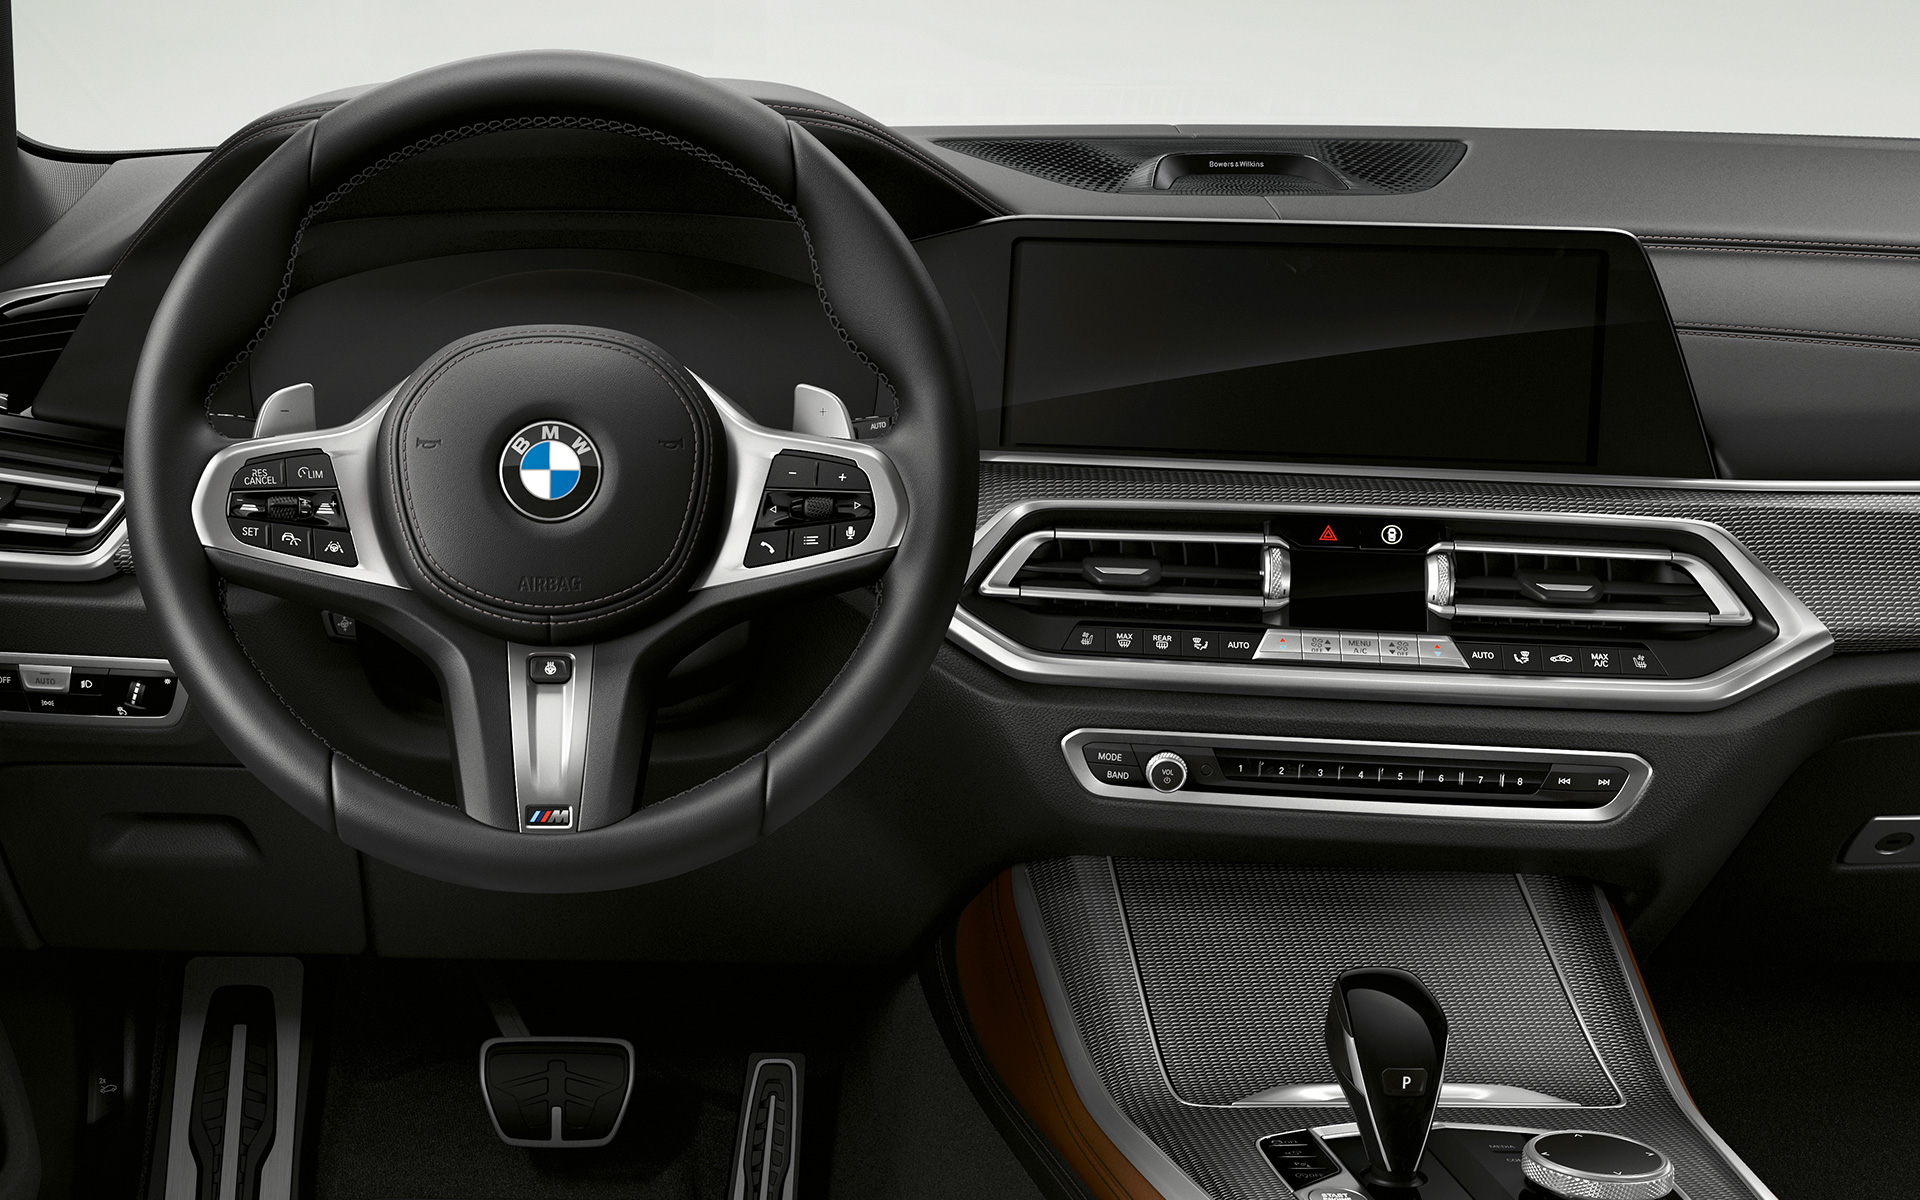 M leather steering wheel BMW X5 M50i and M50d G05 2018 SUV cockpit